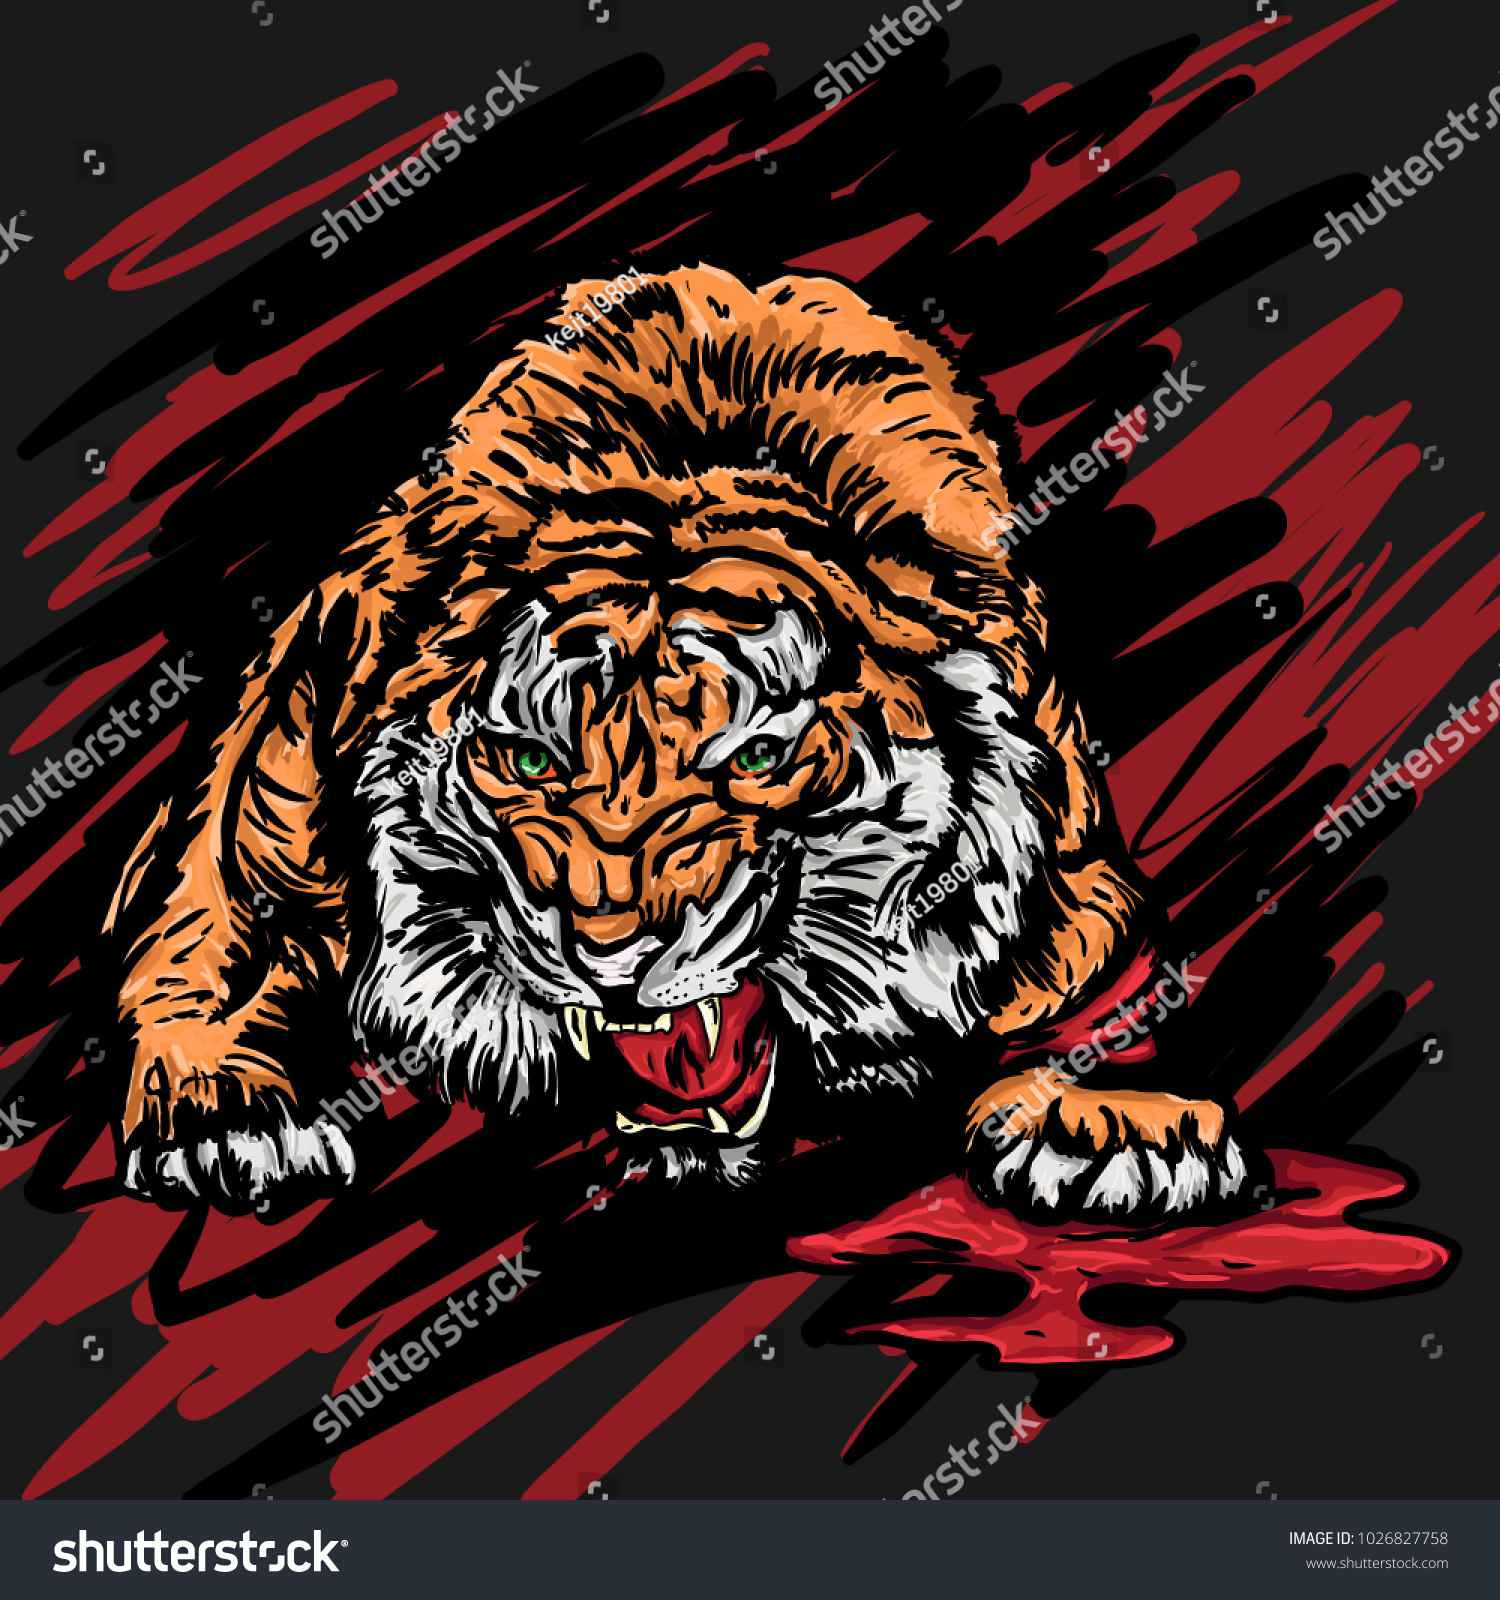 Vector Illustration Crouched Wounded Tiger Growling Stock Vector ...